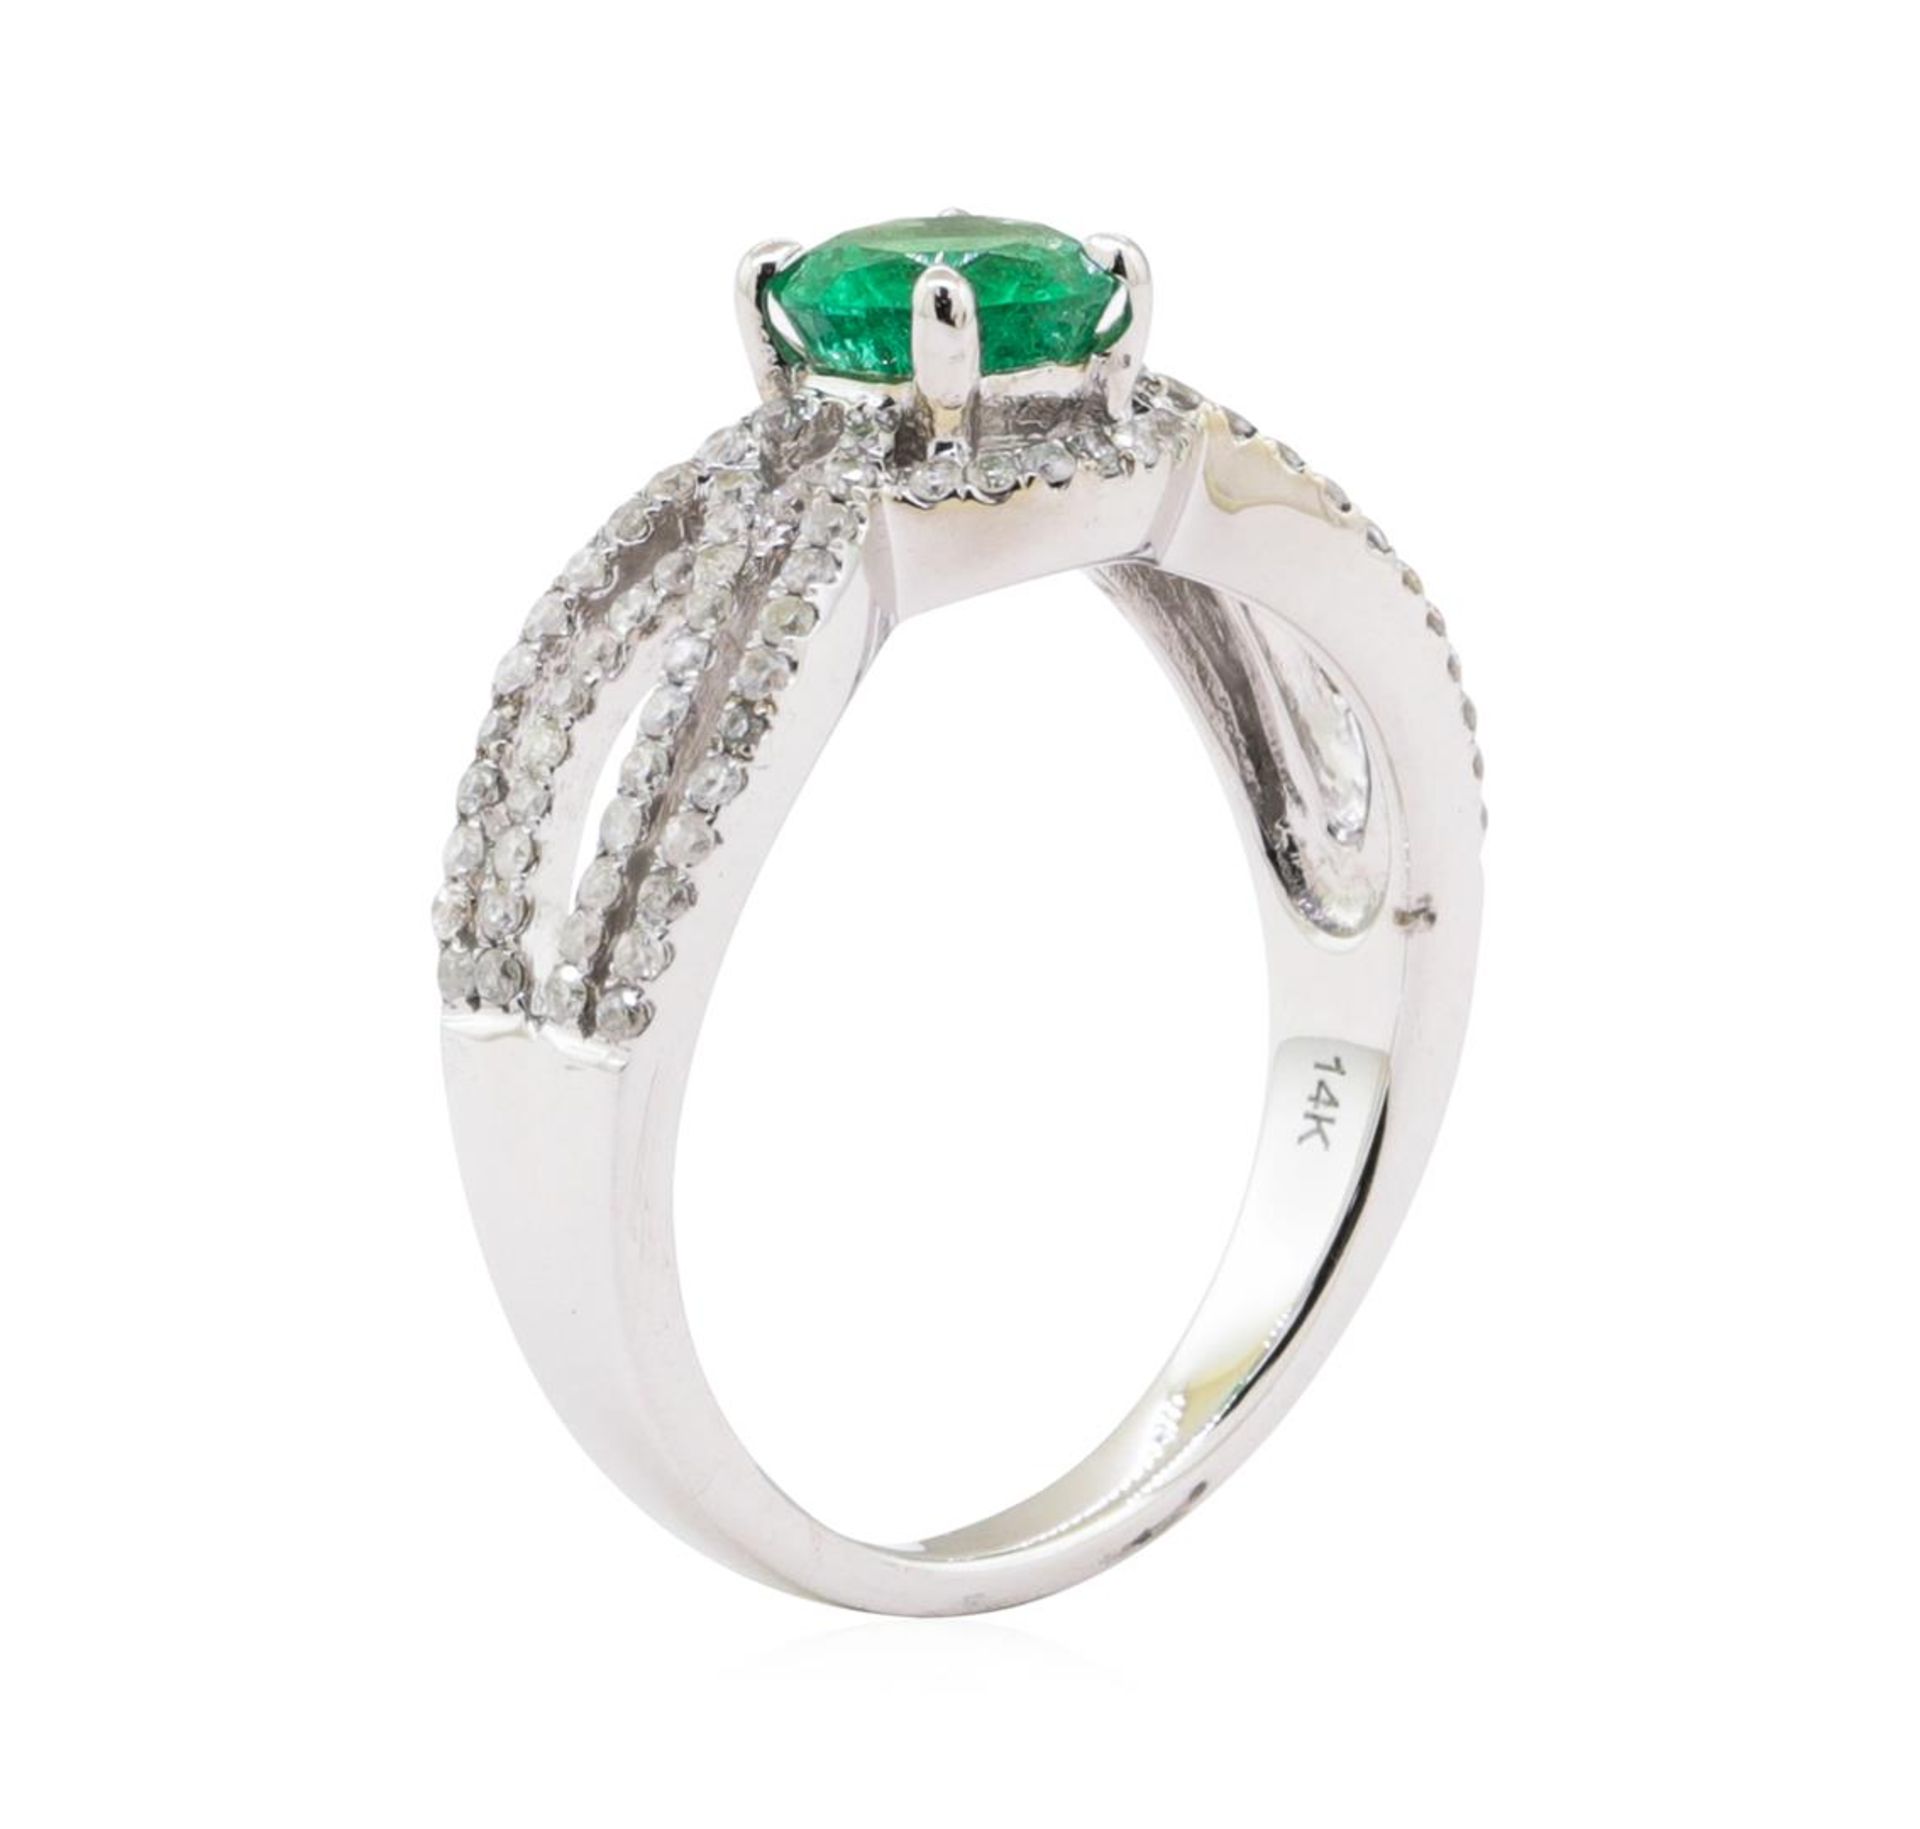 0.78ct Emerald and Diamond Ring - 14KT White Gold - Image 4 of 4